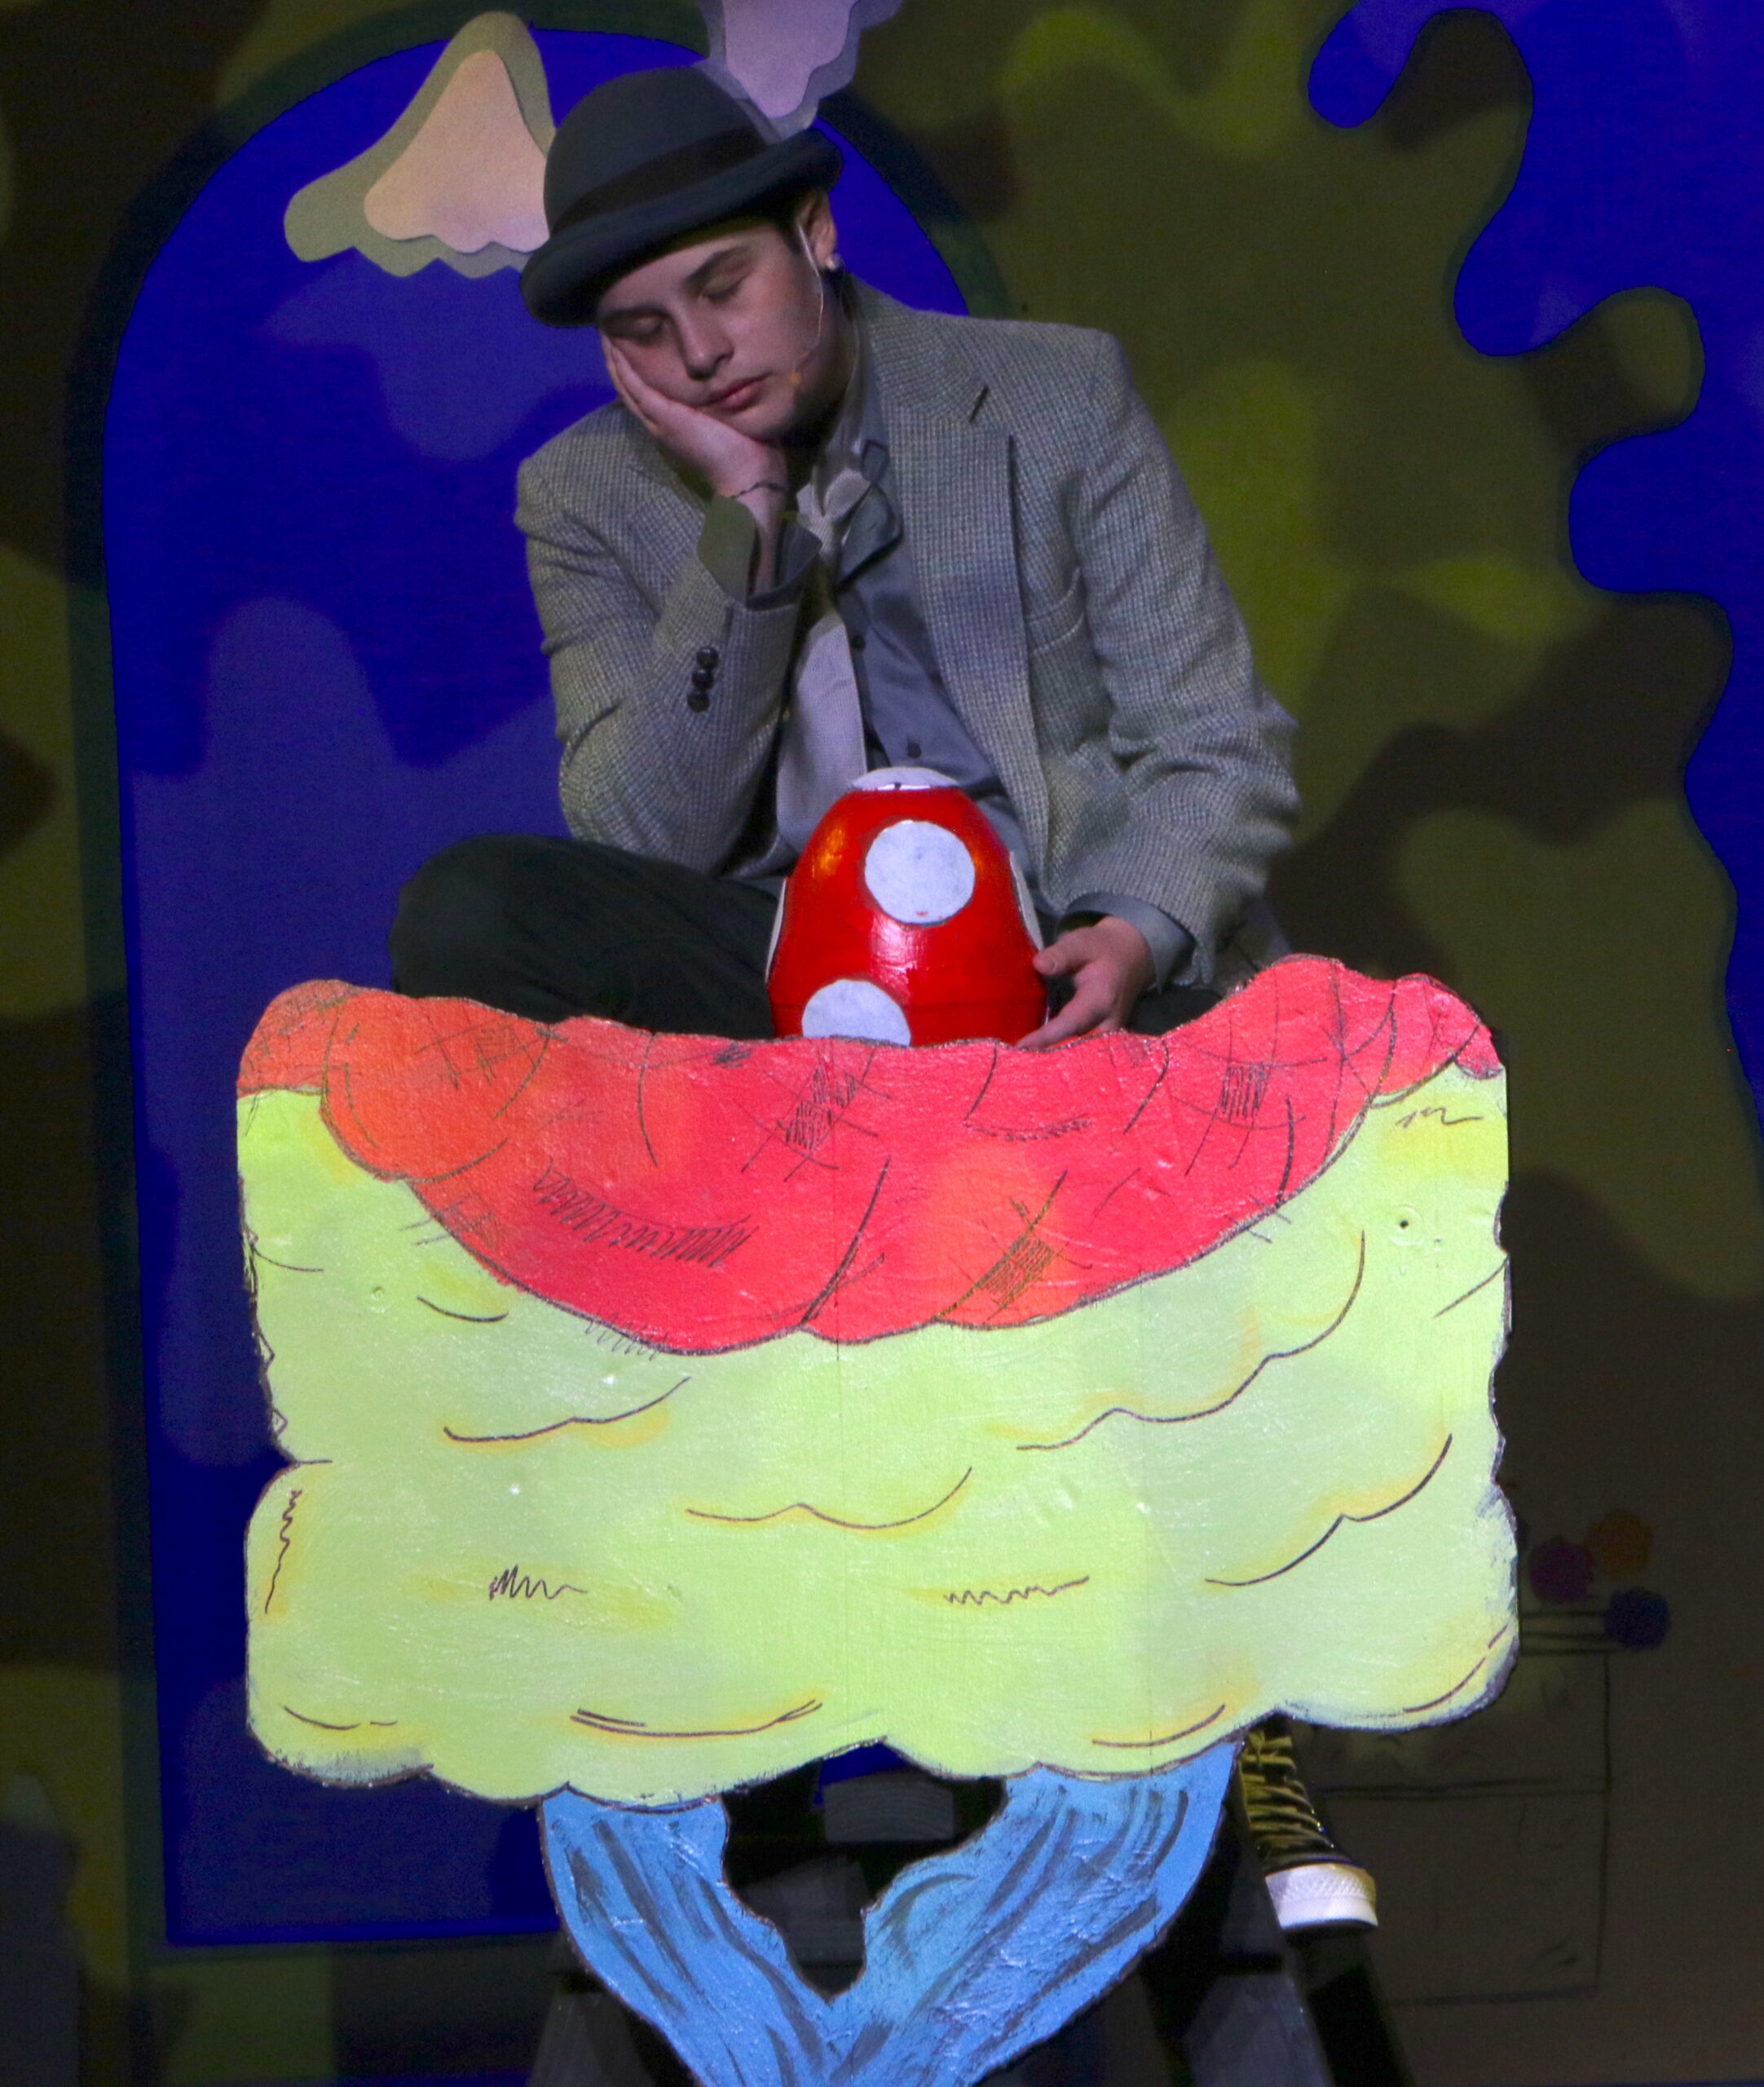 Student performing on stage - boy with a hat looking down at a red egg with white spots